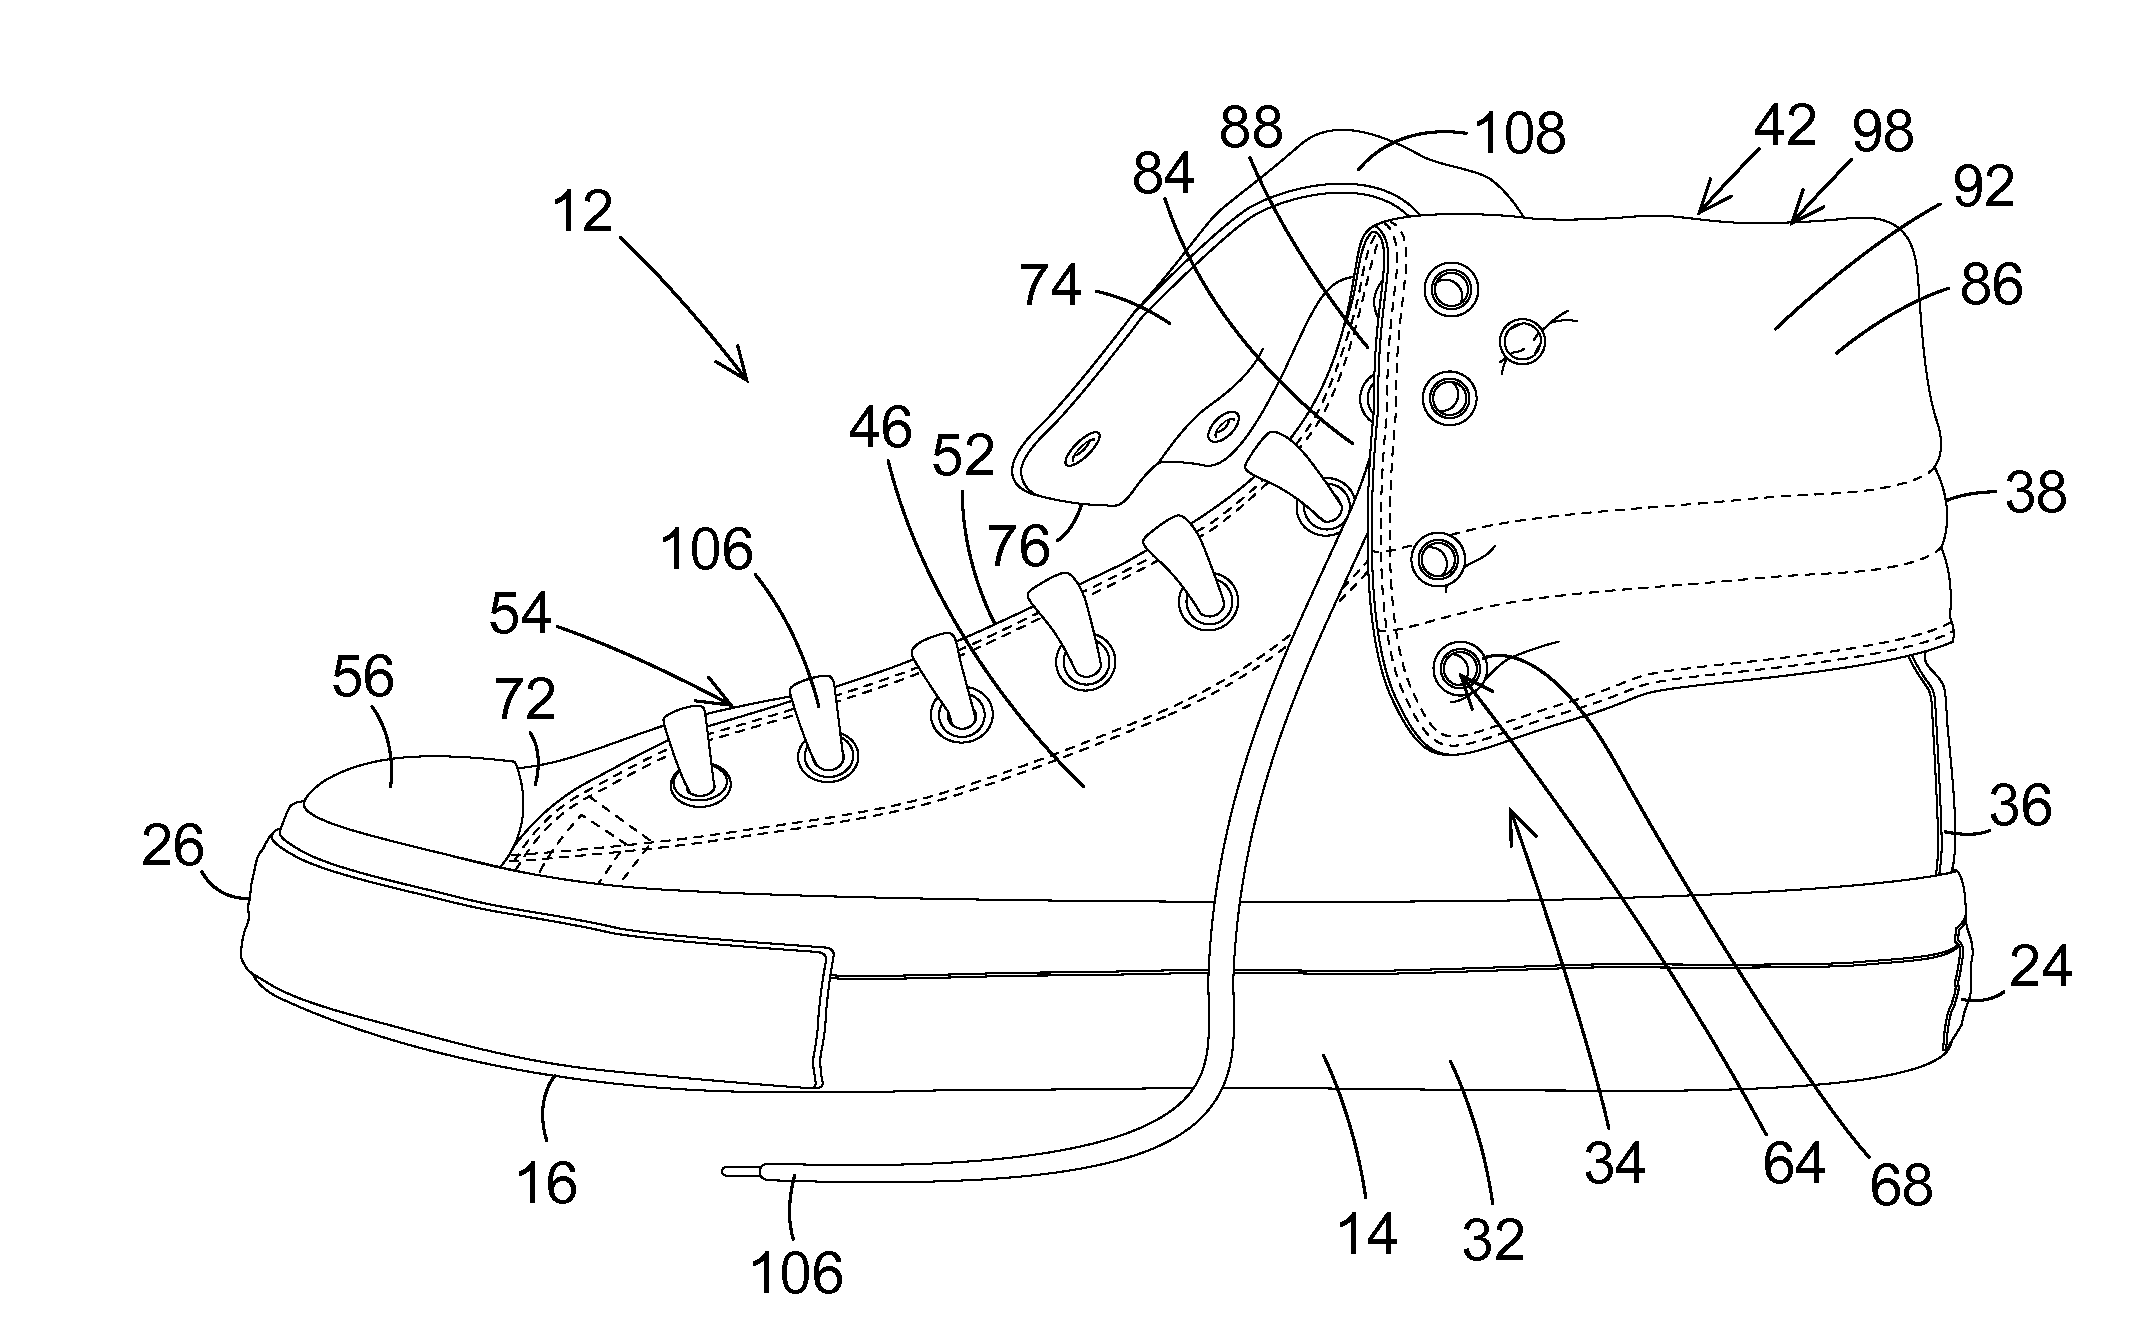 Shoe Construction With Fold Over Ankle